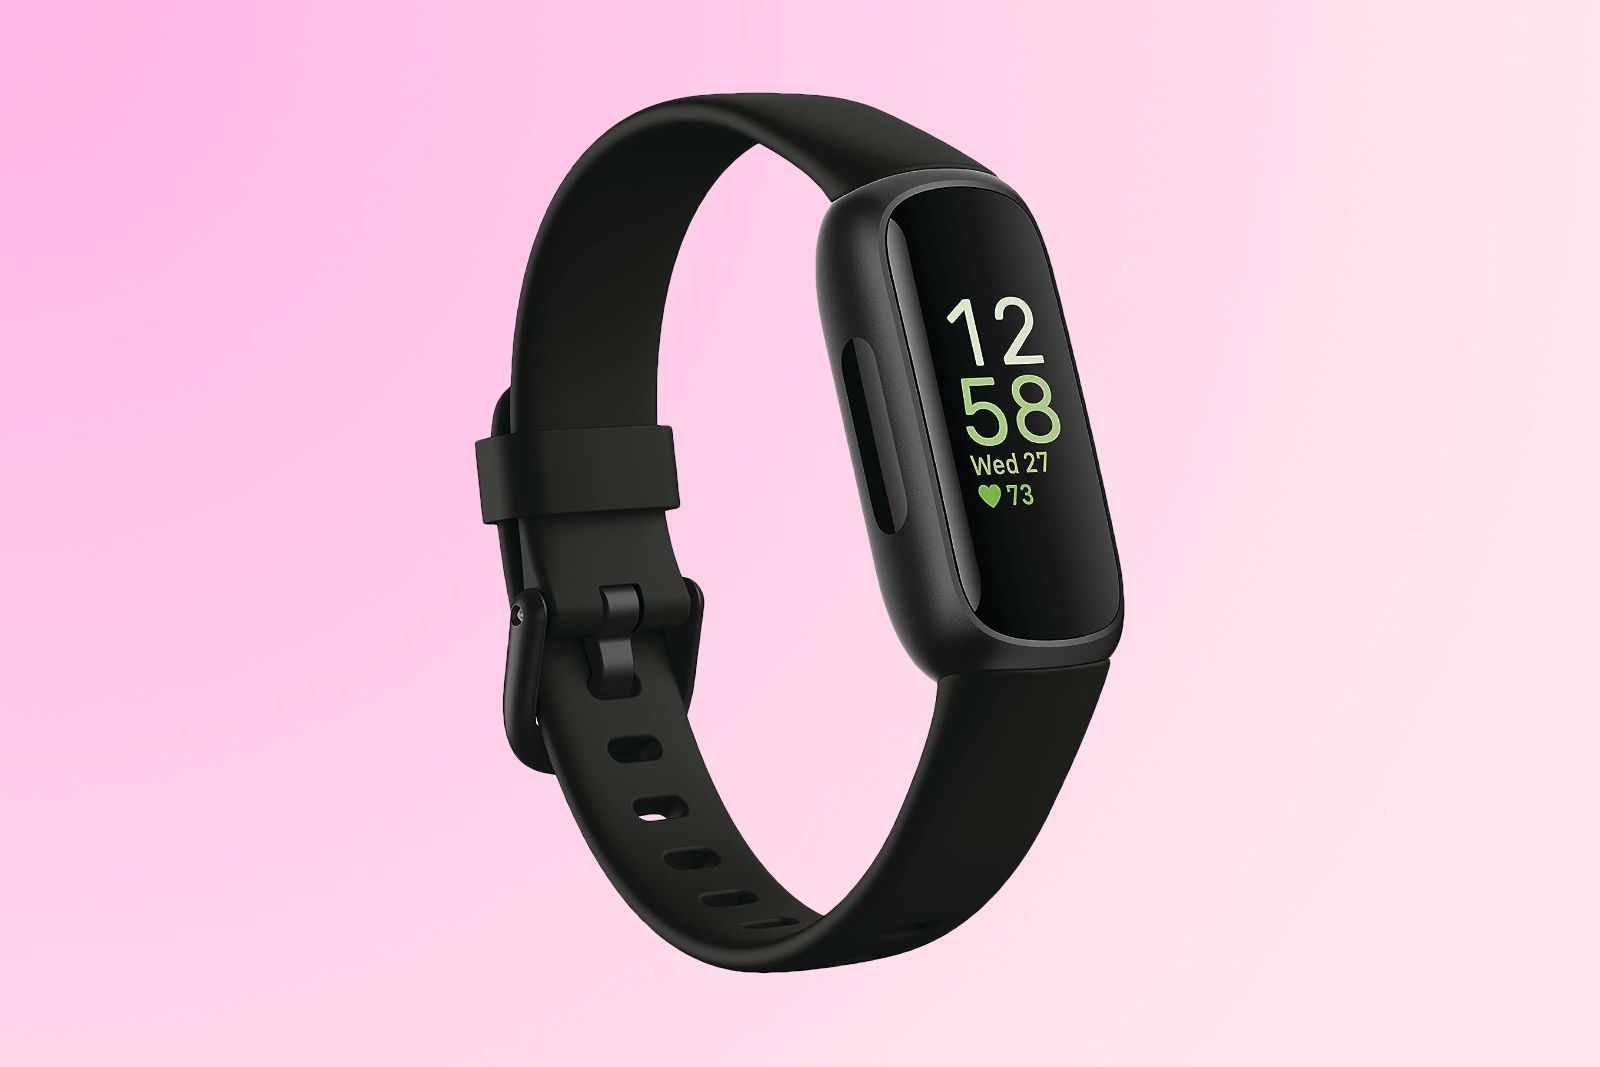 The small, pill-shaped Fitbit Inspire 3 with front screen and back clasp visible.